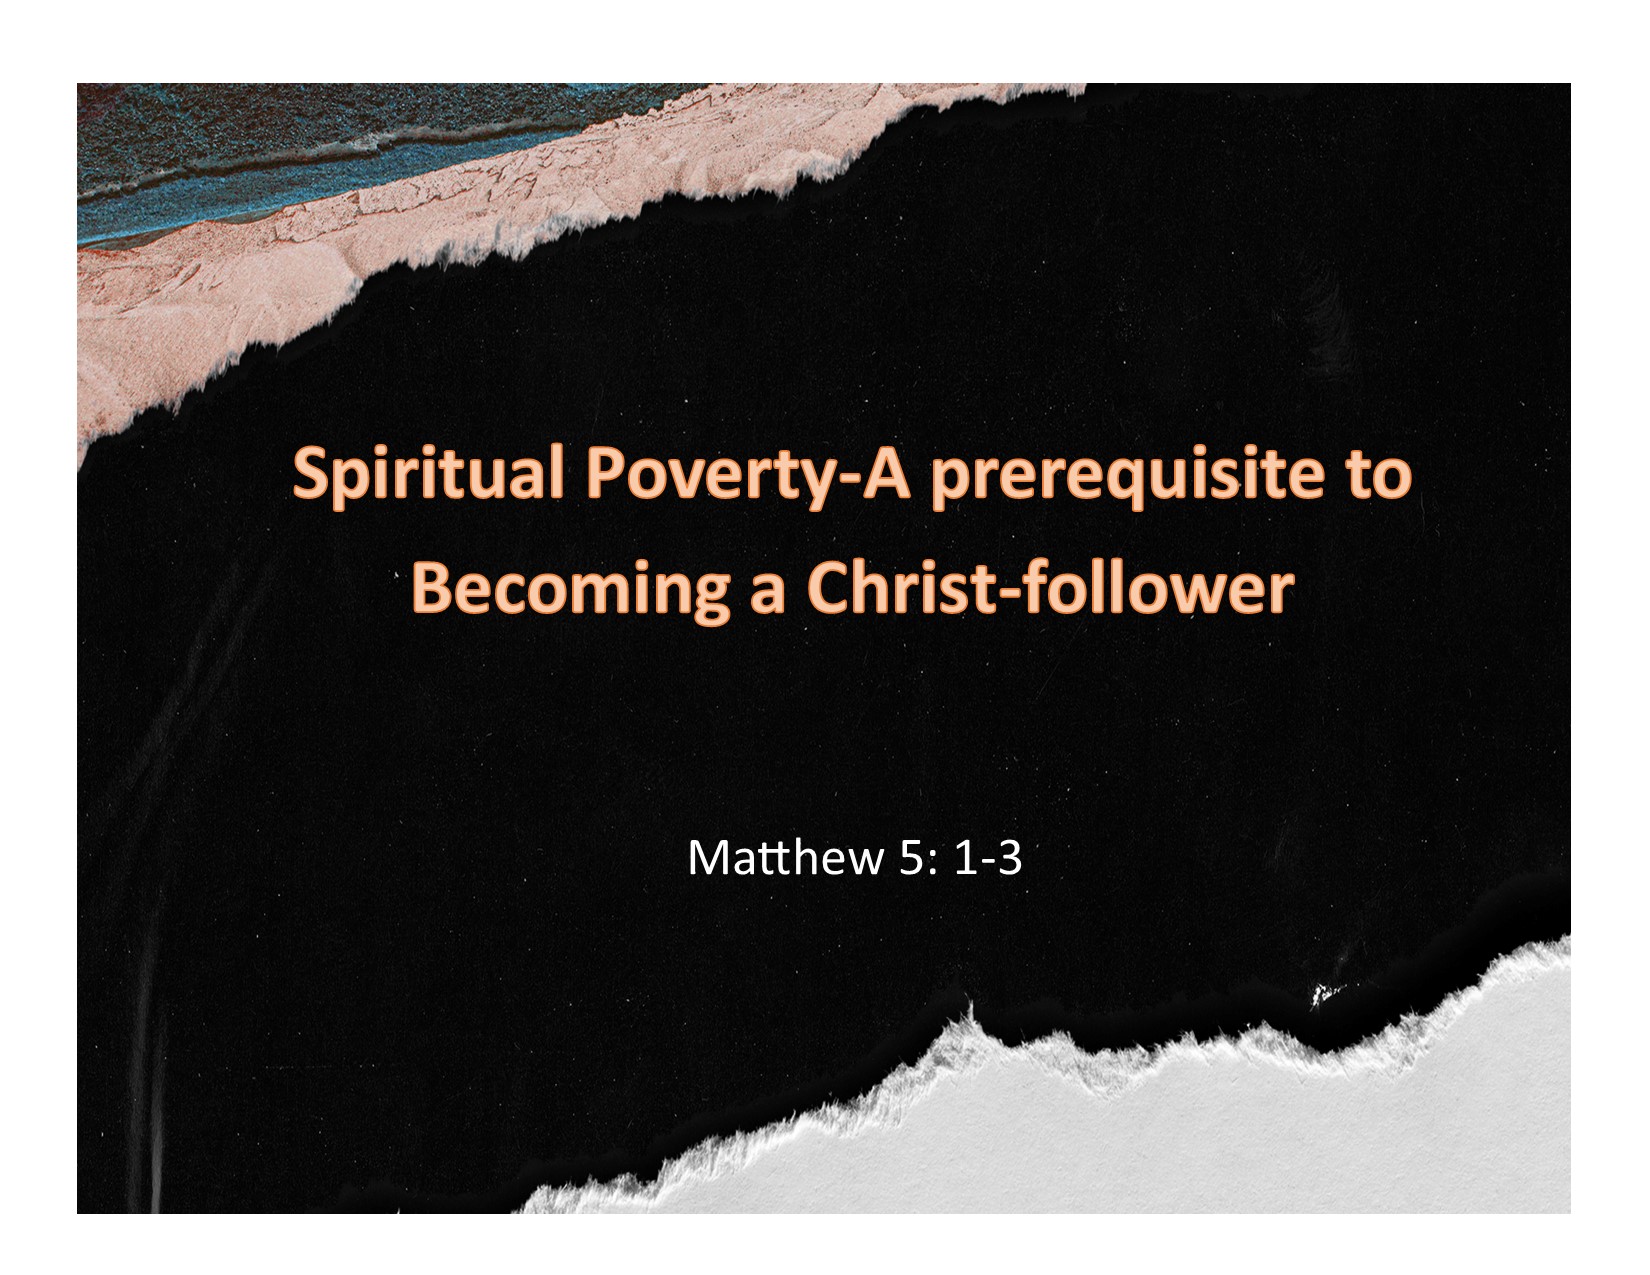 Aug 21, 2022 - Spiritual Poverty–A prerequisite to Becoming a Christ-follower  (Video) - Matthew 5: 1-3